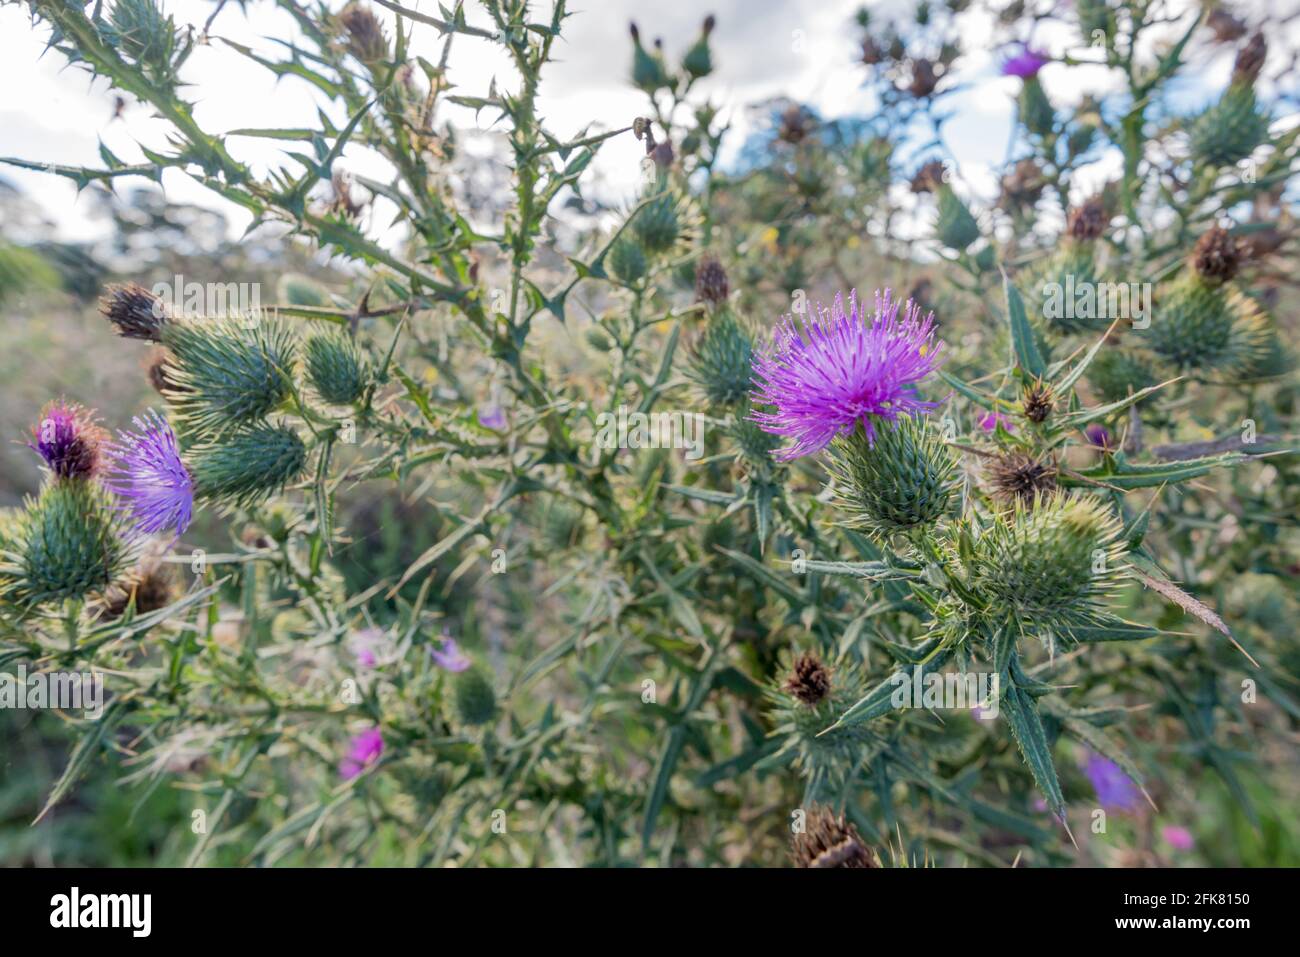 Scotch thistle (Onopordum acanthium) is an annual or biennial plant and a major weed in NSW, Australia in pastures receiving mostly winter rain Stock Photo